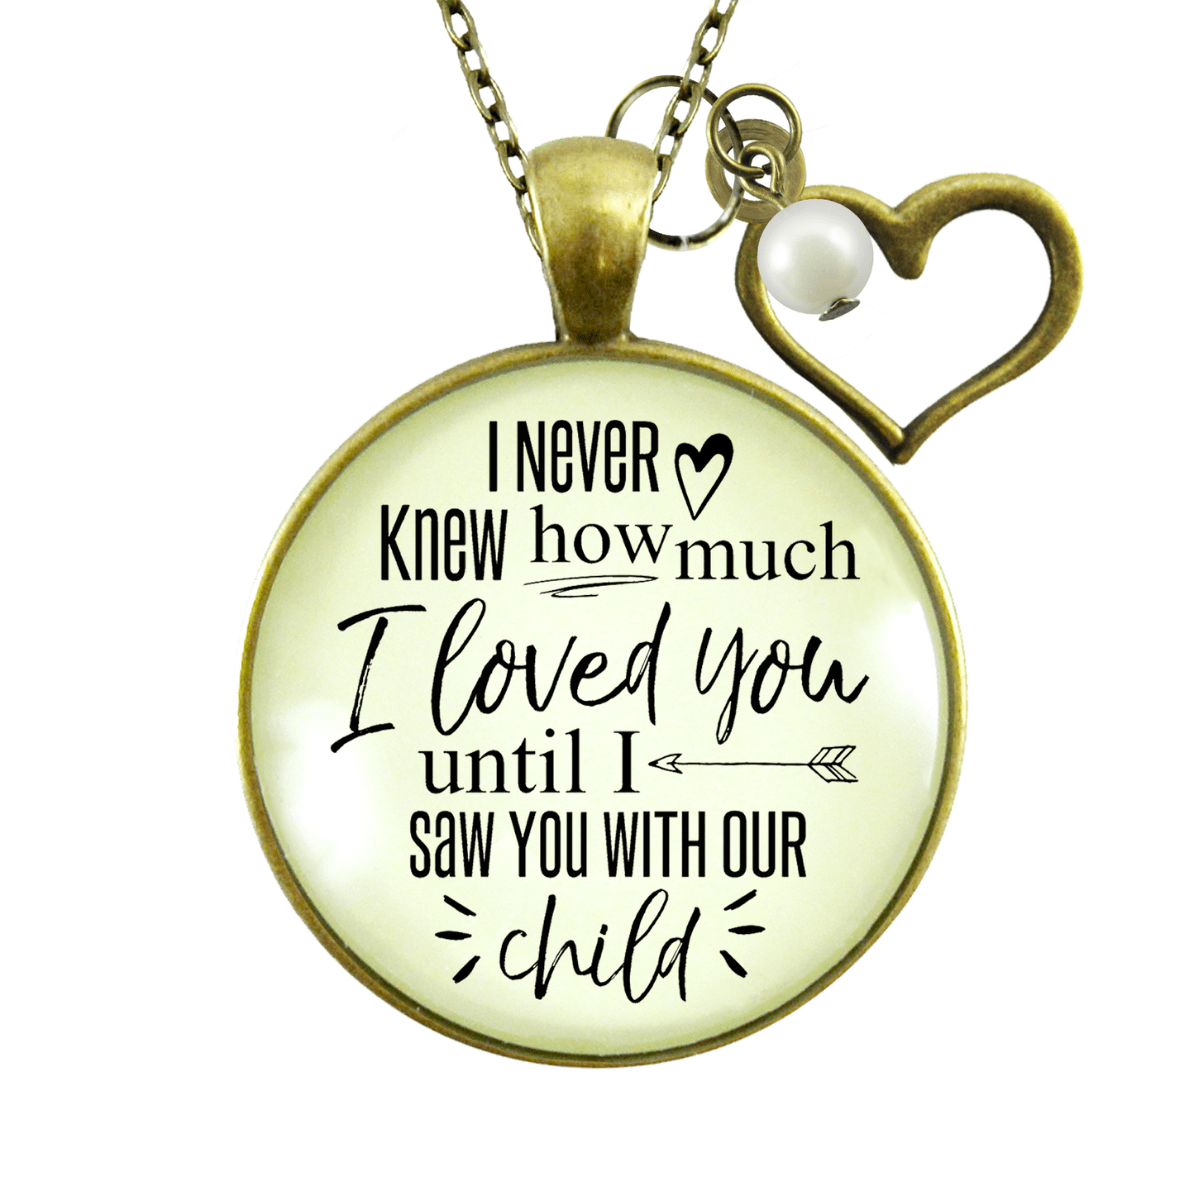 Gutsy Goodness Wife Necklace New Mom I Never Knew How Love Until Child Gift Jewelry - Gutsy Goodness;Wife Necklace New Mom I Never Knew How Love Until Child Gift Jewelry - Gutsy Goodness Handmade Jewelry Gifts